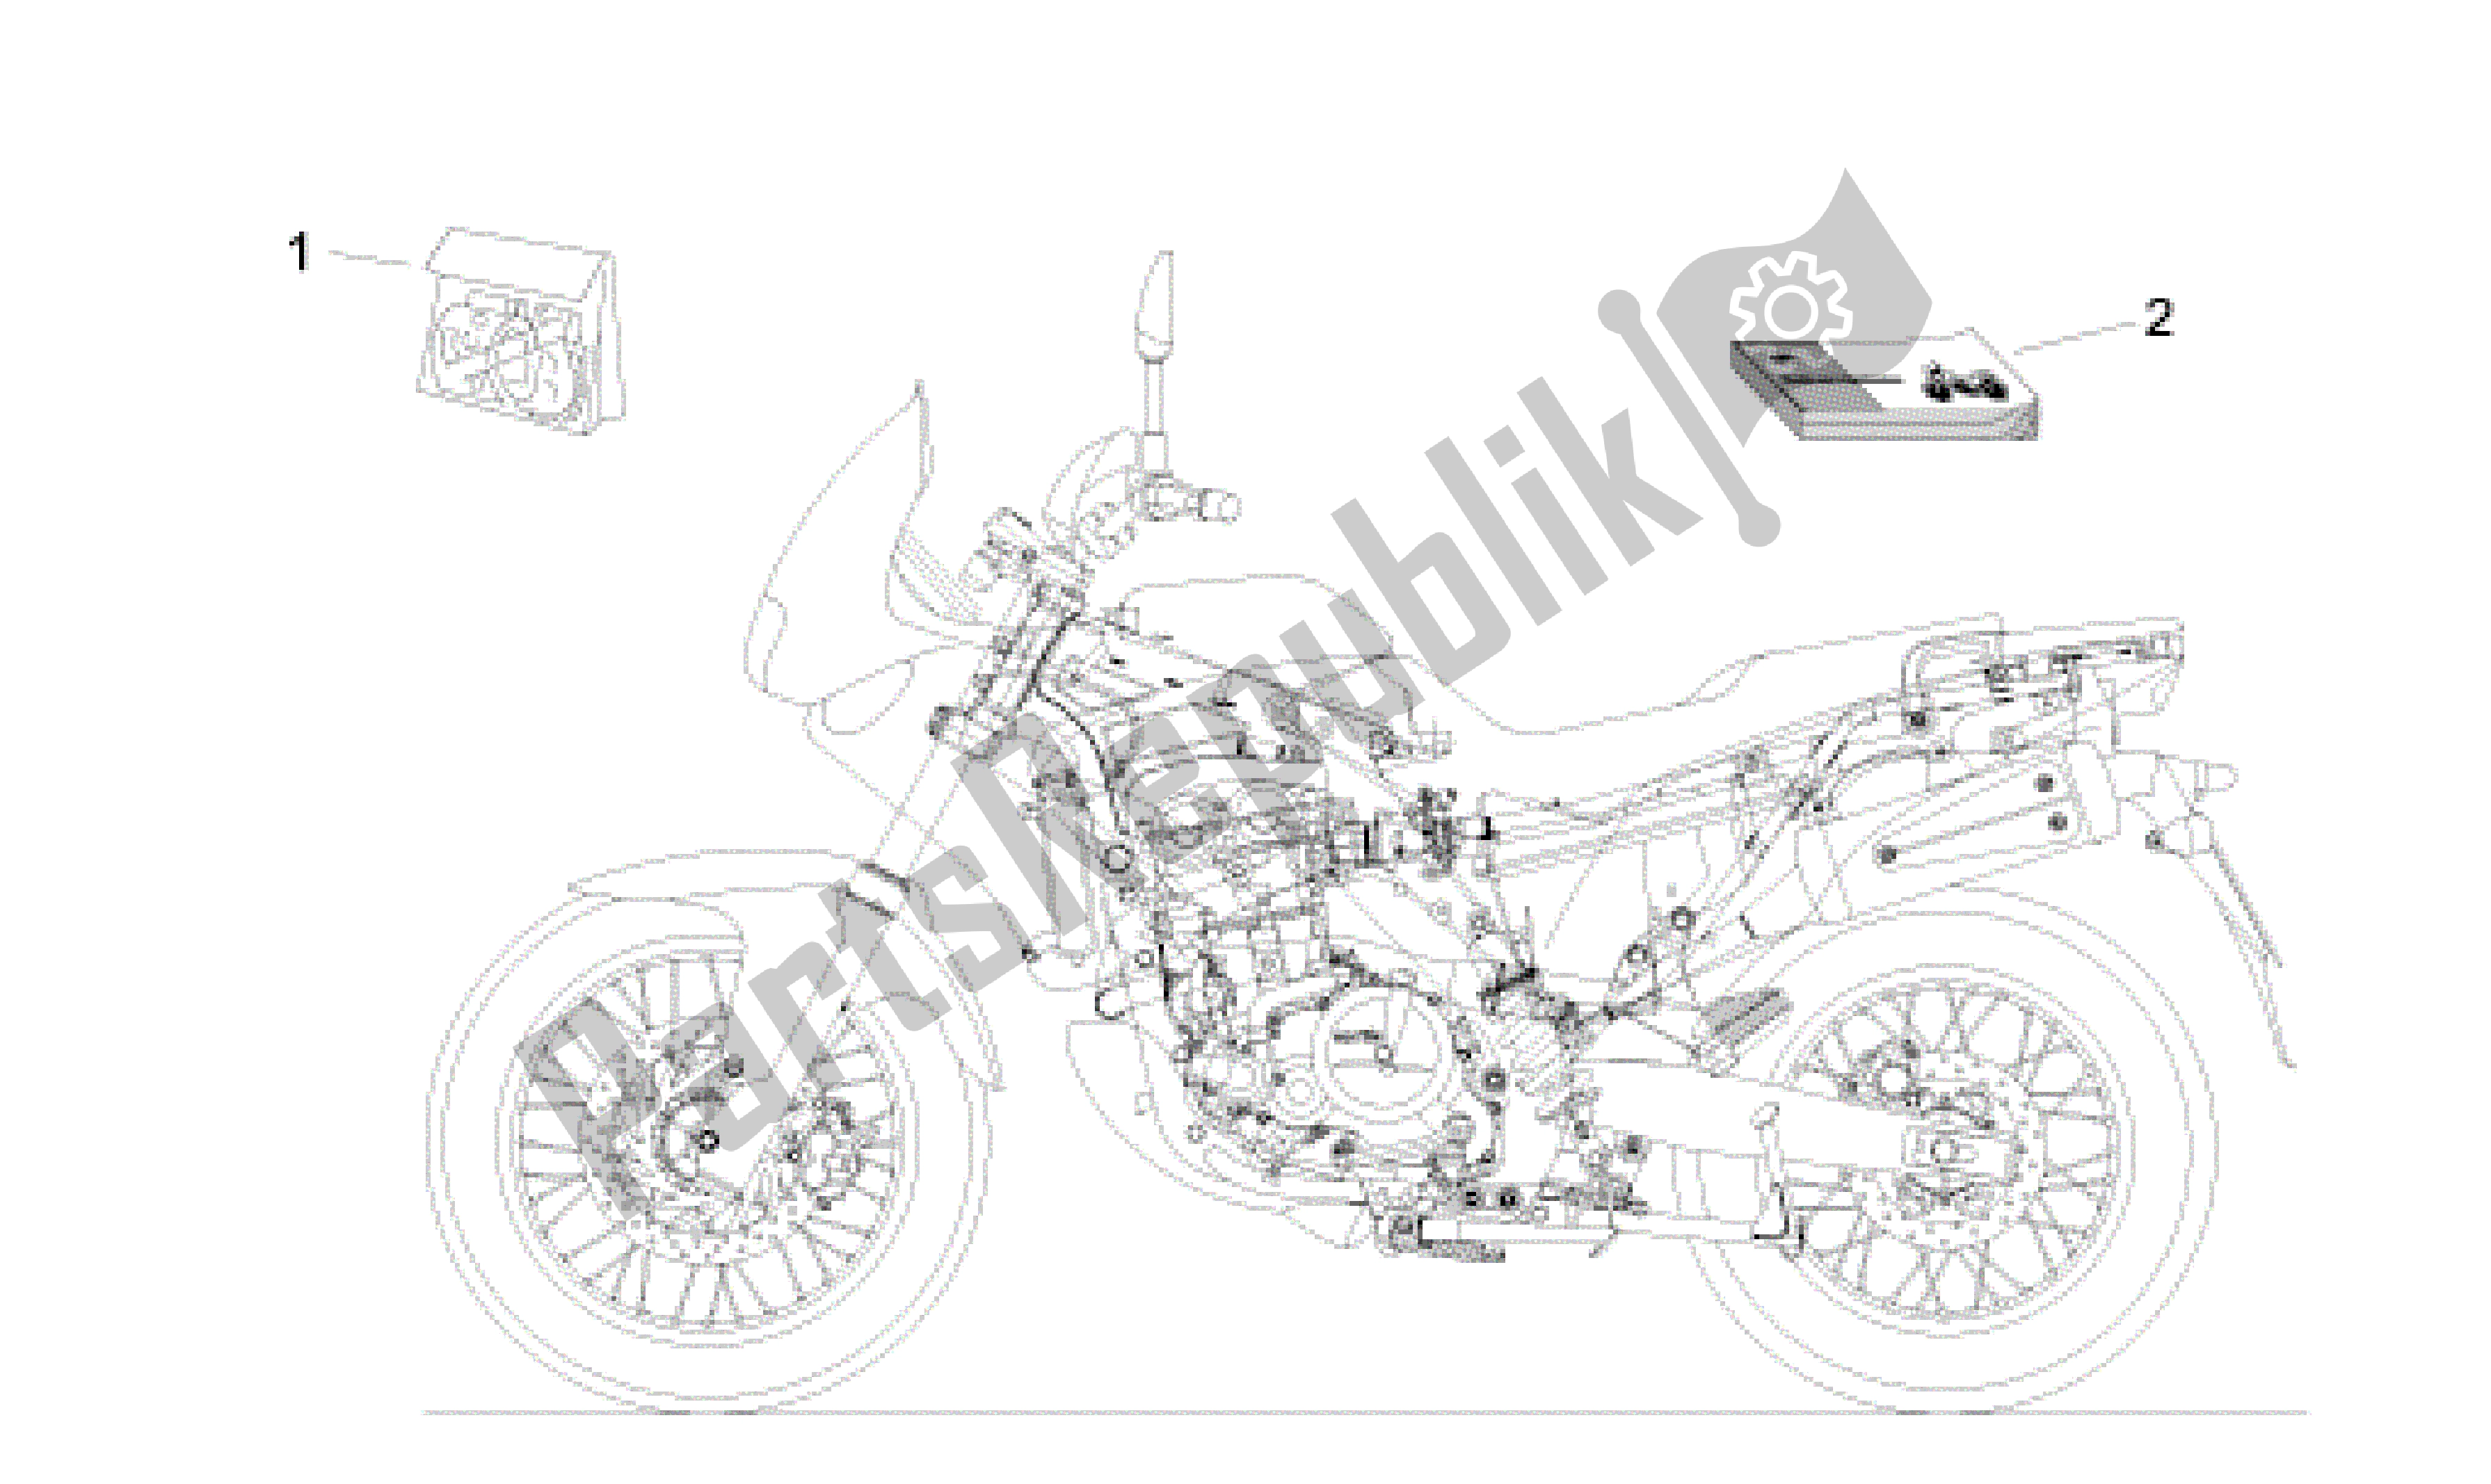 All parts for the Decal And Operator's Handbook of the Aprilia Pegaso 650 2001